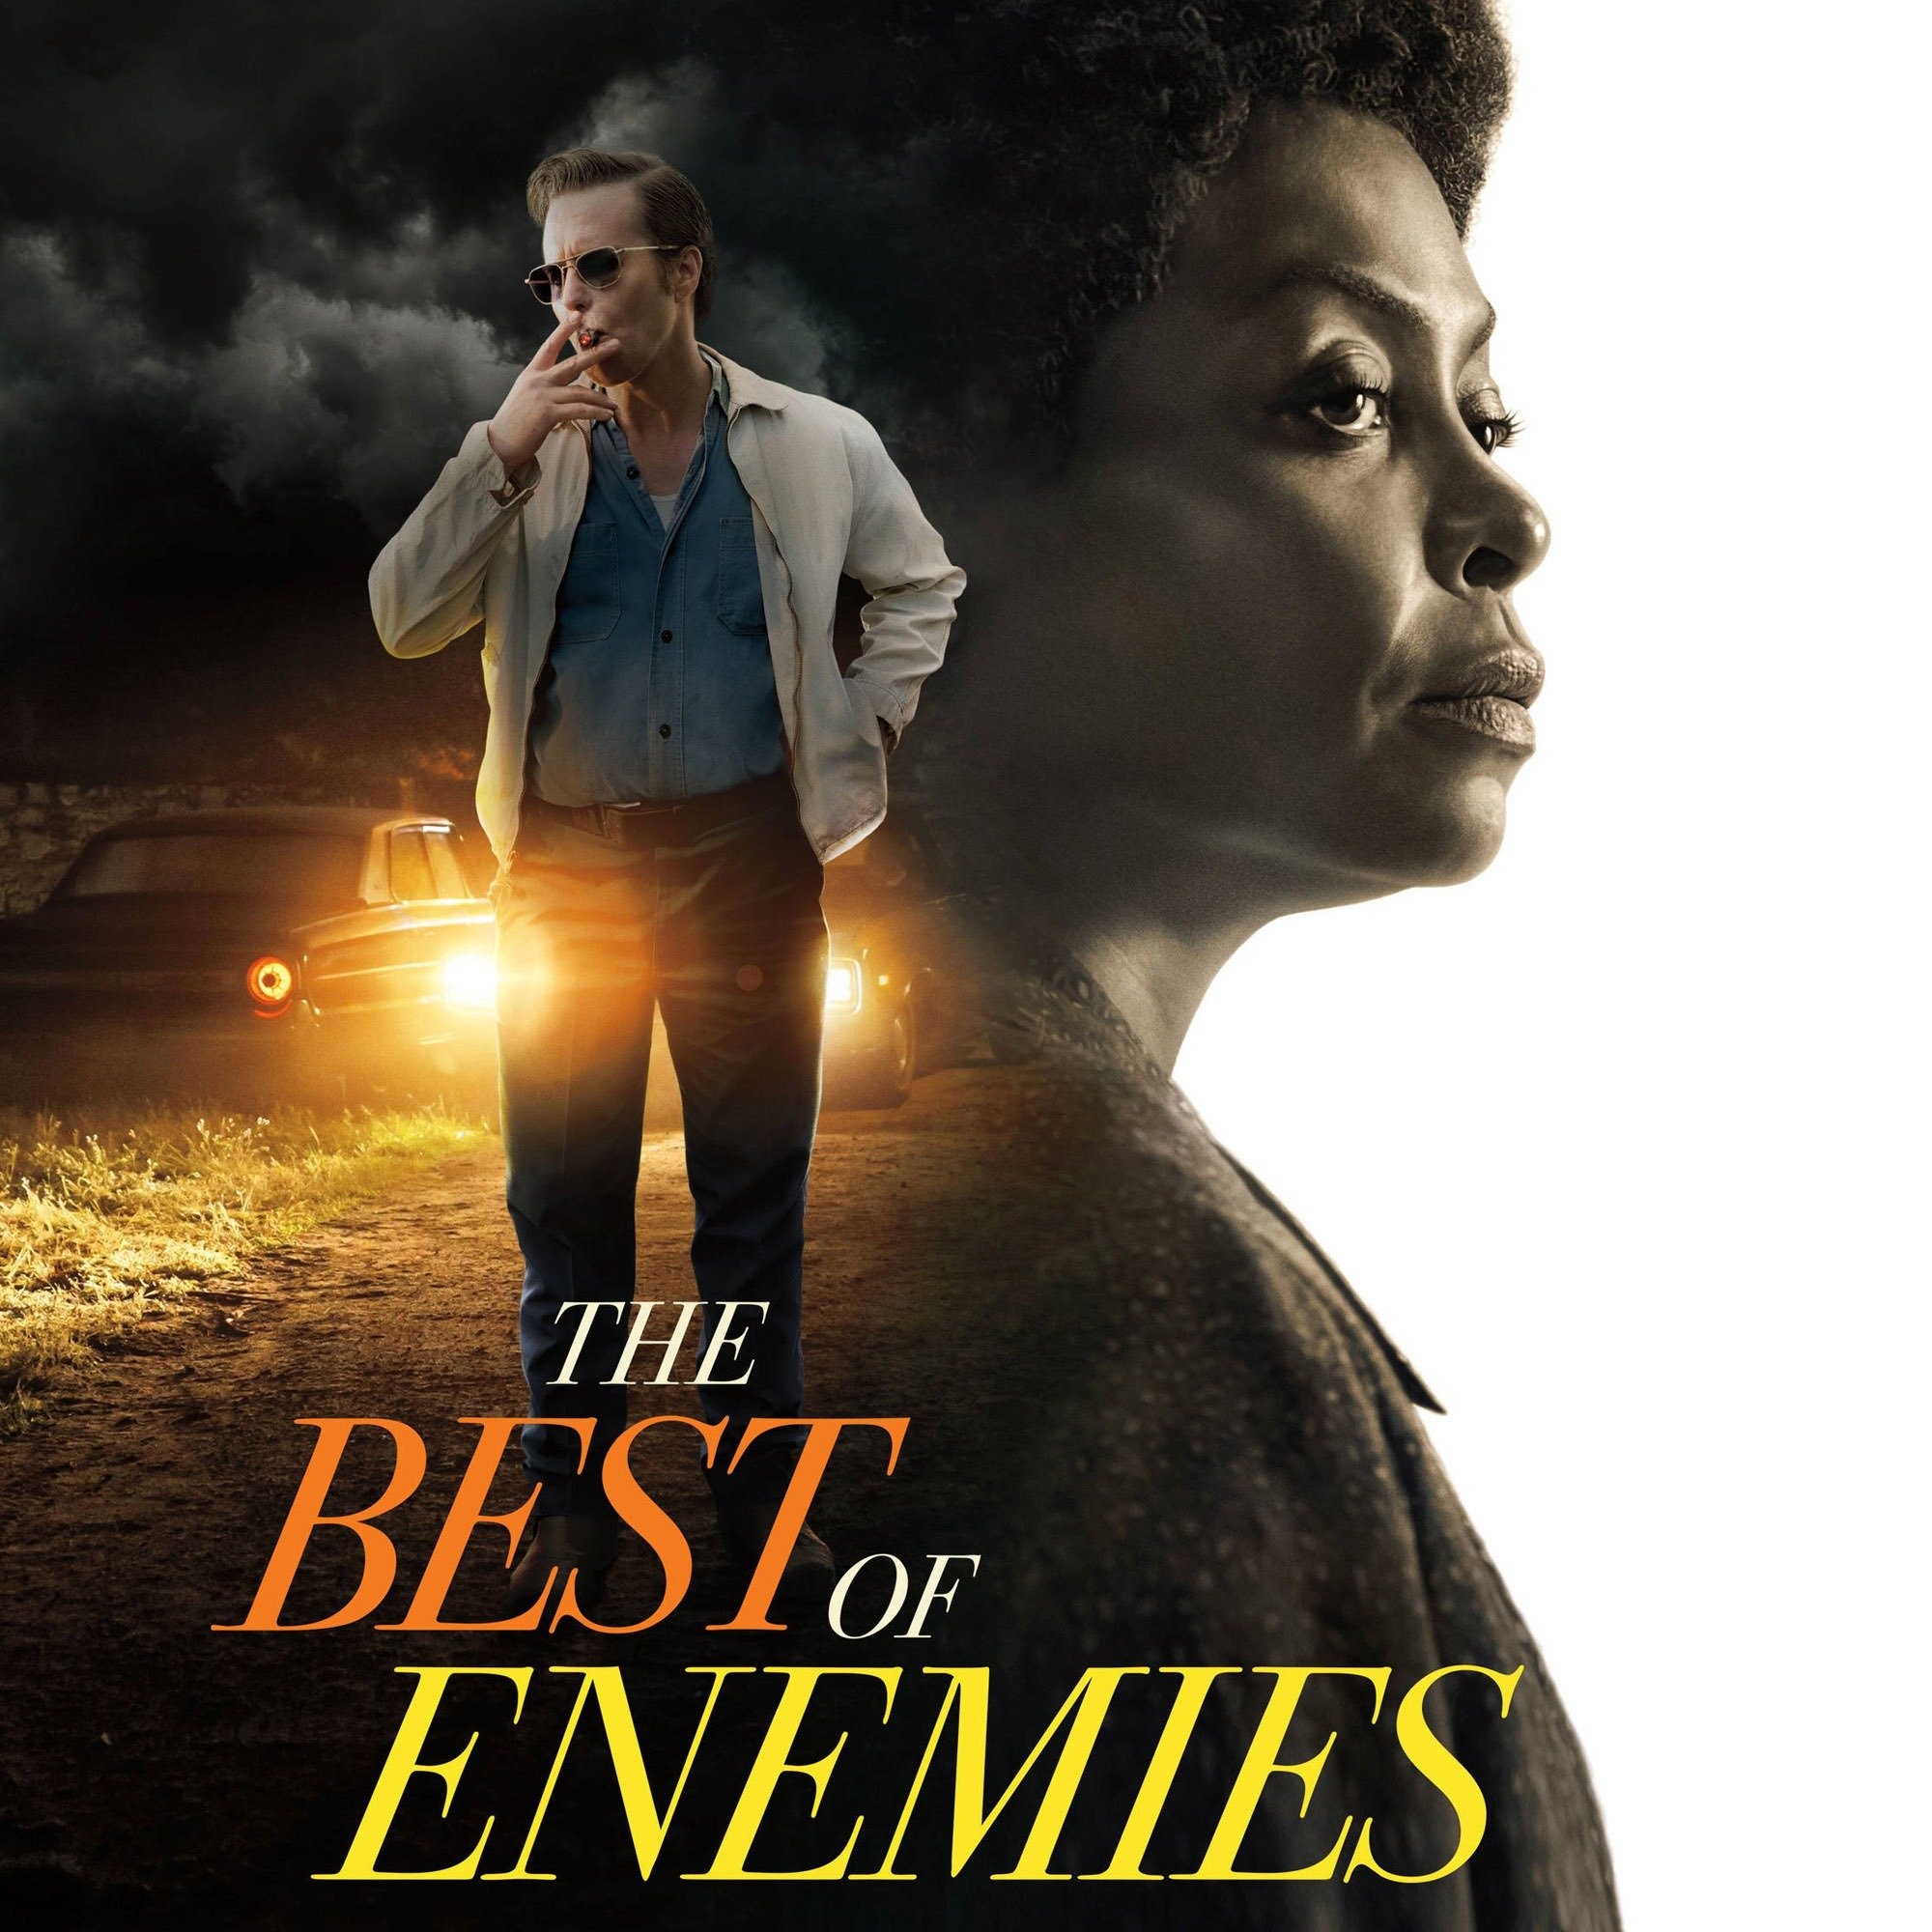 The Best of Enemies, Civil rights struggle, Unlikely friendship, Social change, 2000x2000 HD Handy